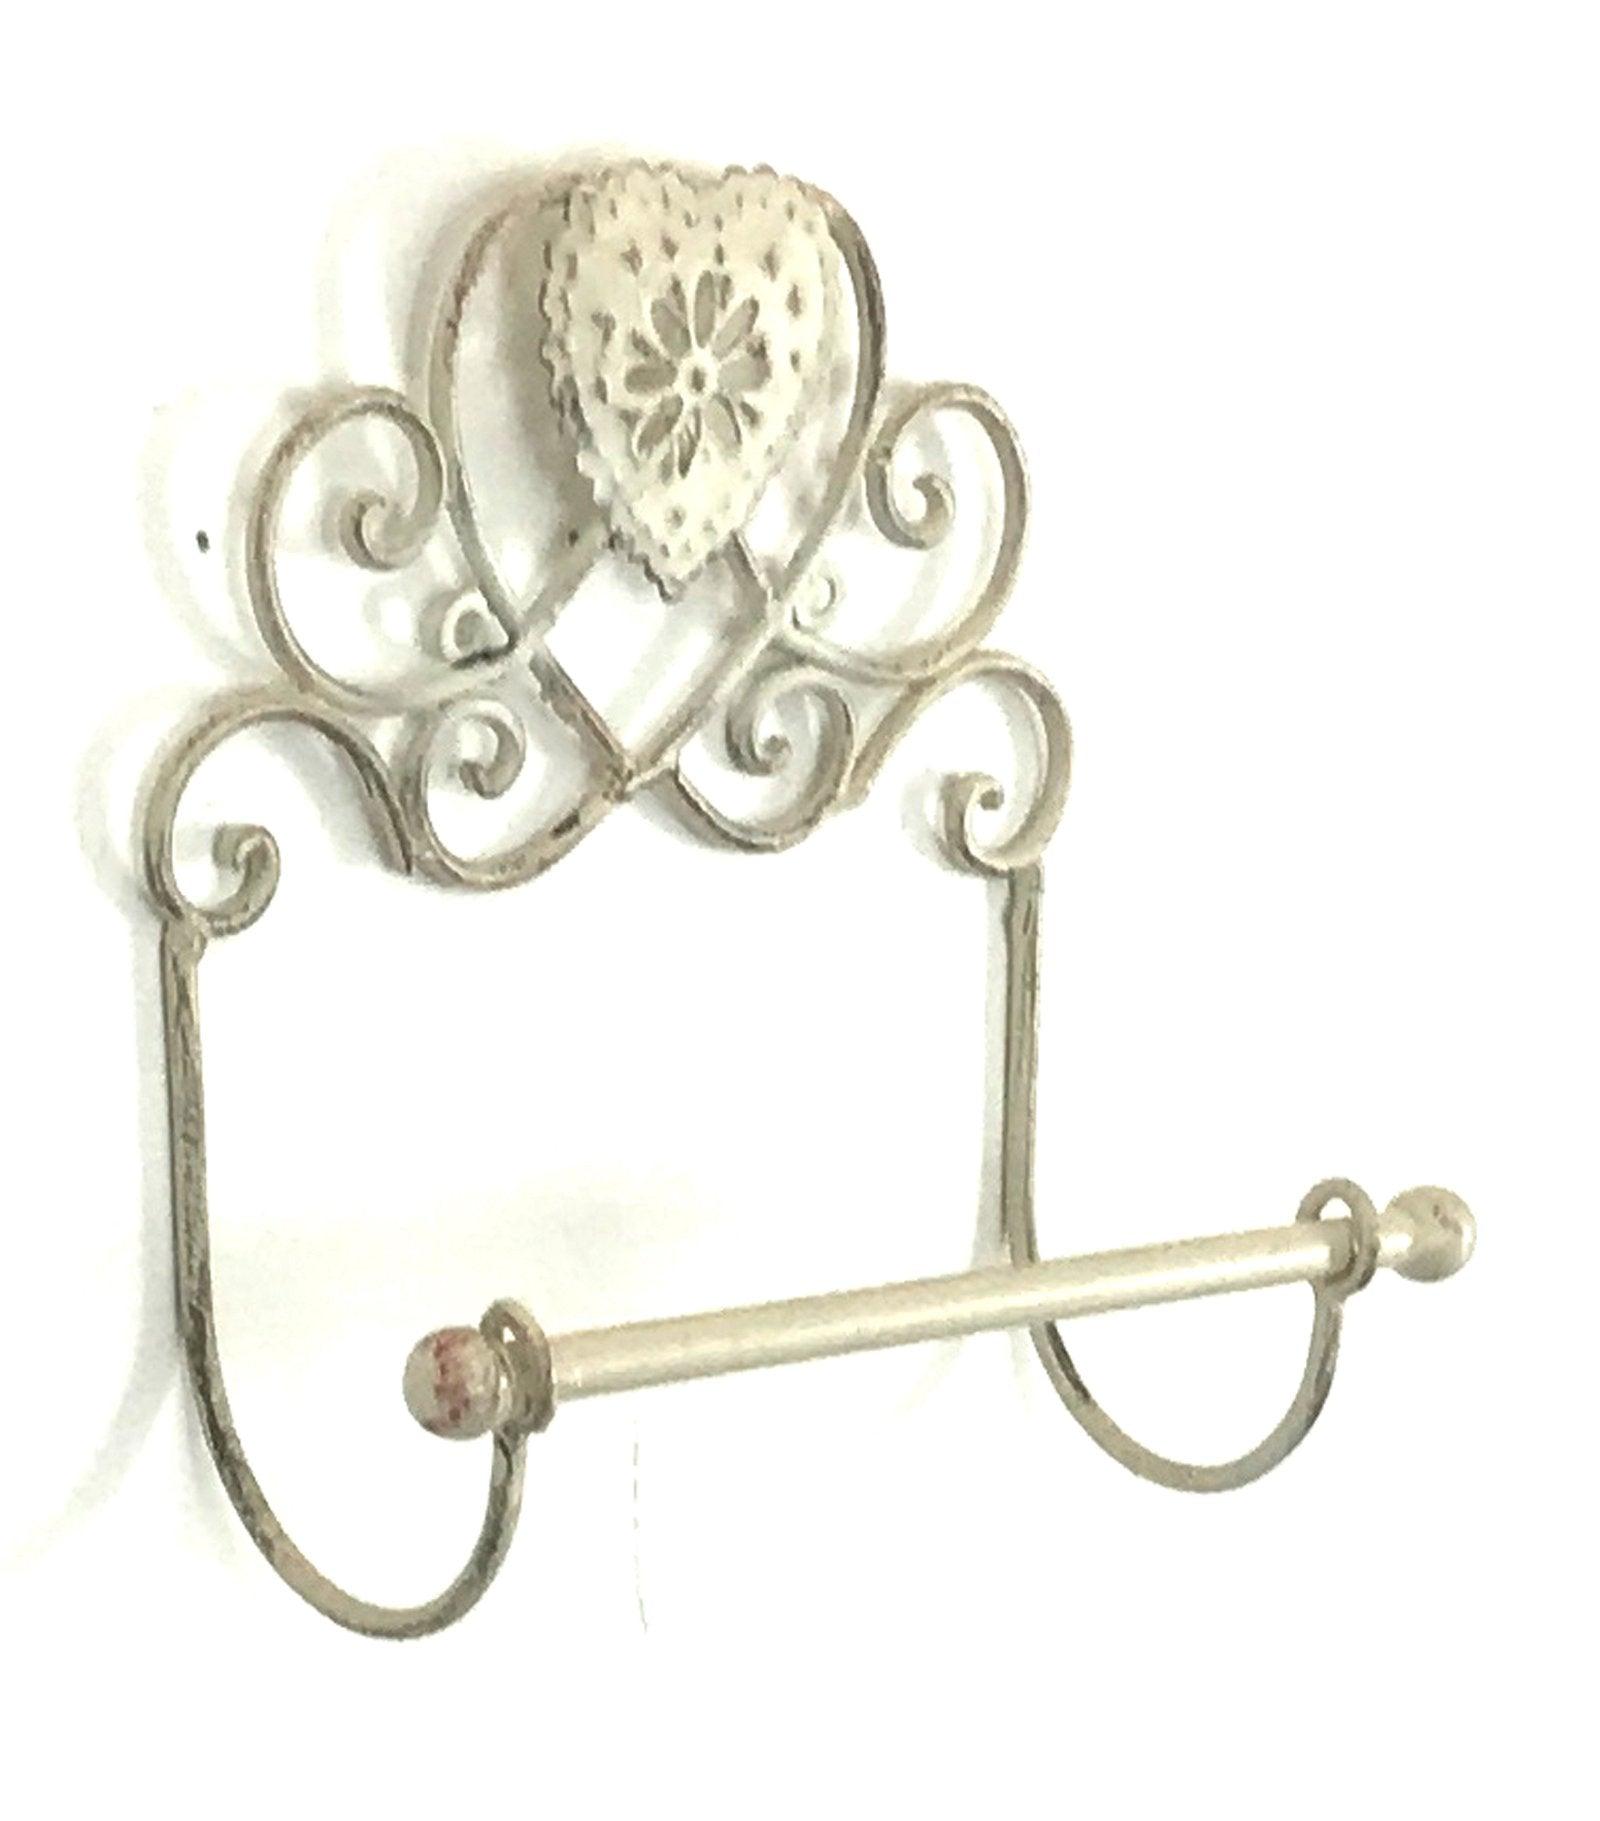 View Cream Heart Toilet Roll Holder Wall Mounted information